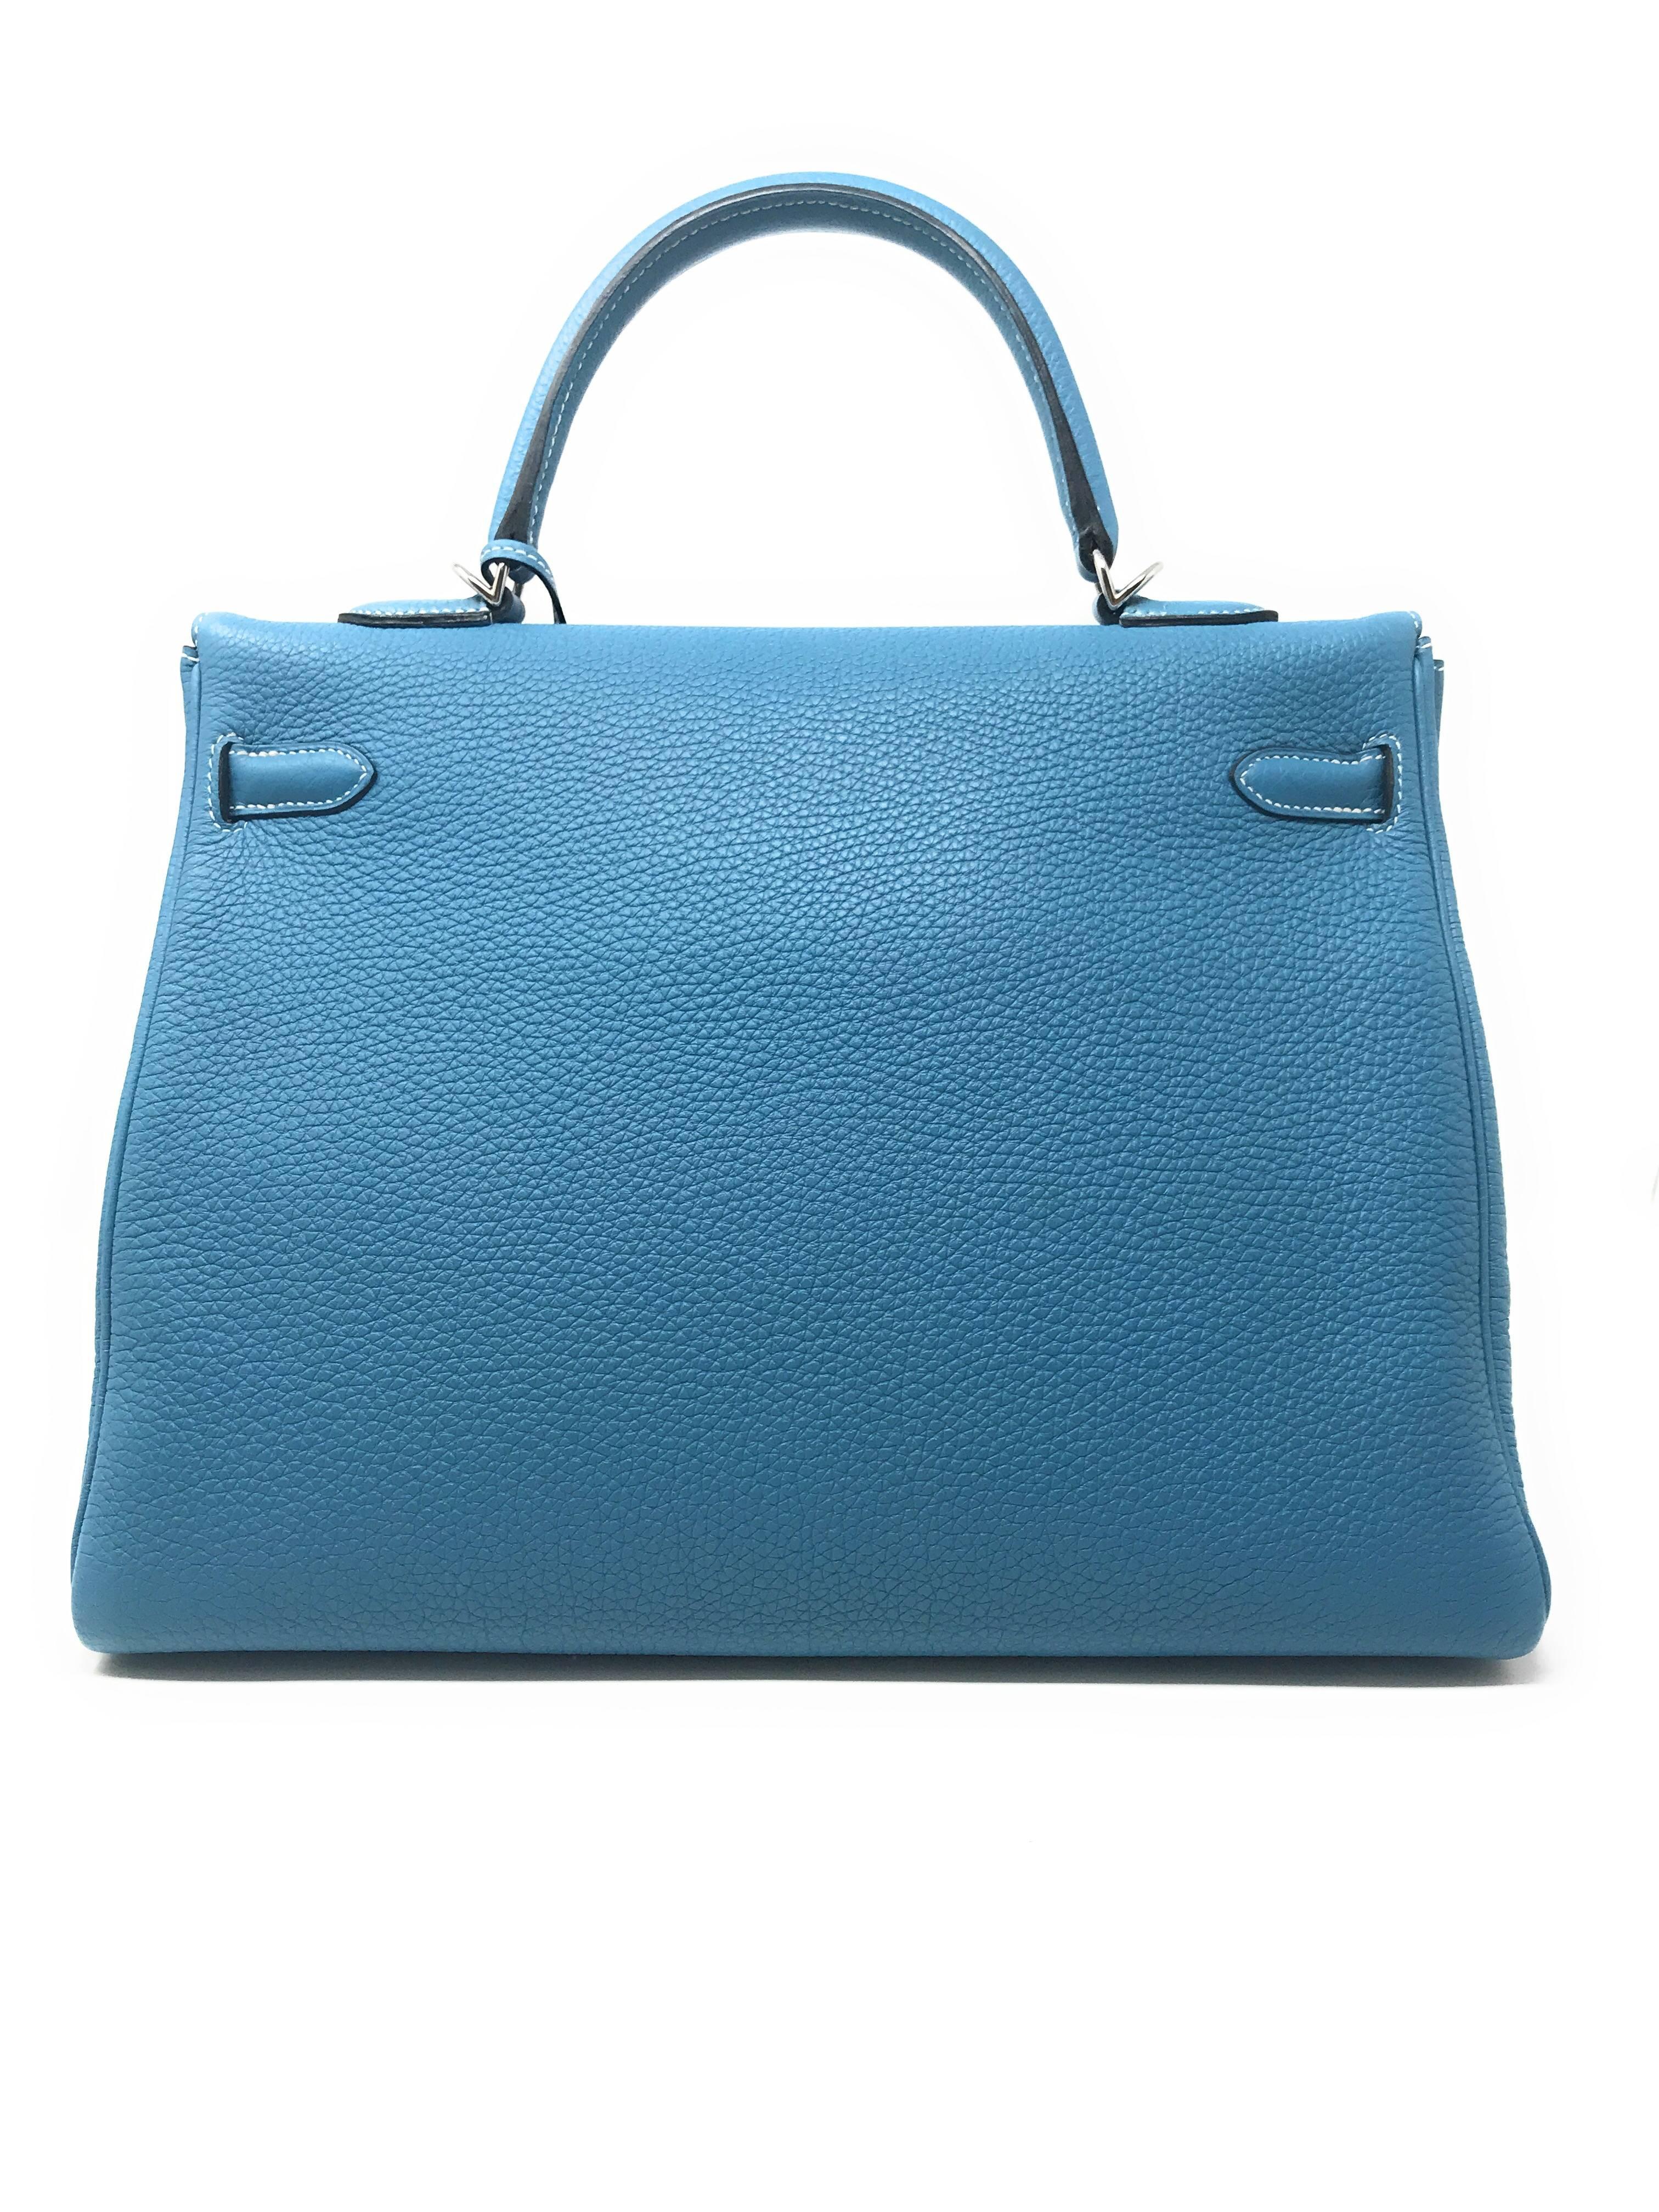 The iconic Hermes Kelly in the casual Blue Jean color that can be enjoyed on a daily basis. 
Crafted in the 35cm size of Togo leather, it is a versatile bag with a single top handle as well as a removable shoulder strap. 
It has white contrast top